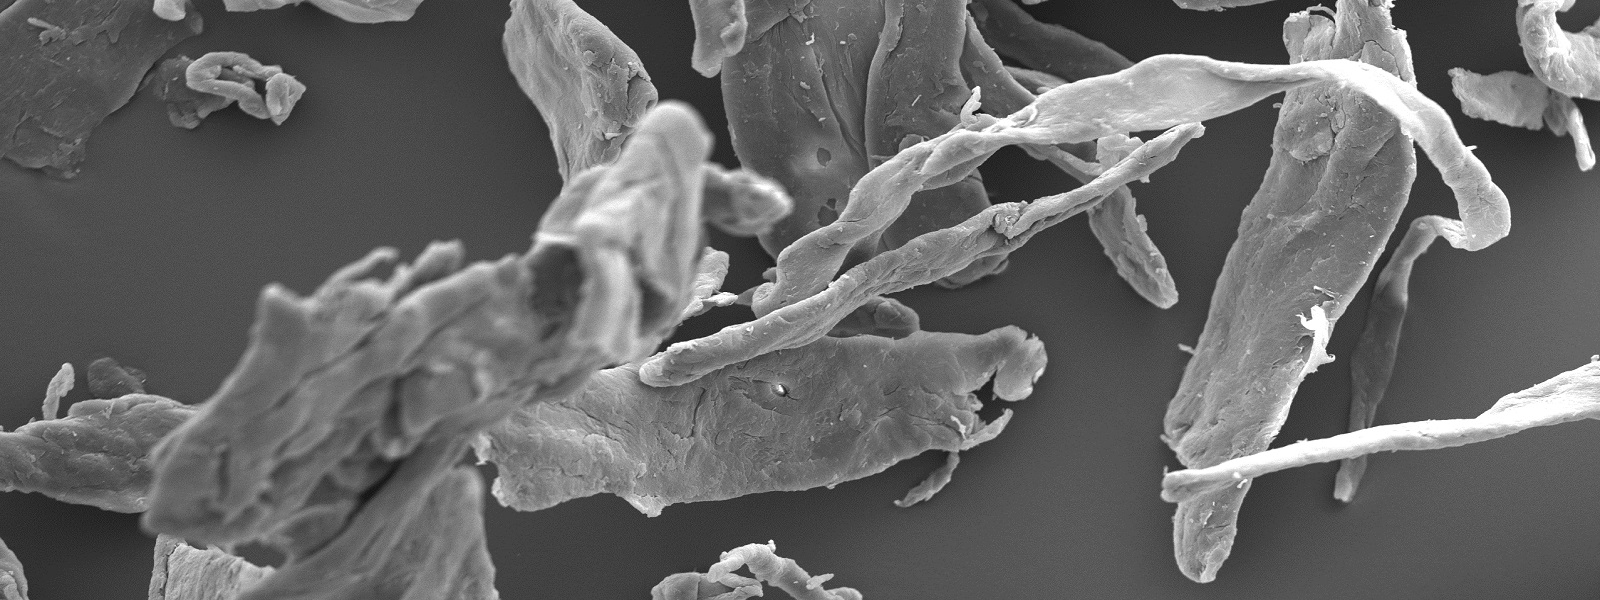 cellulose found from a SEM analysis